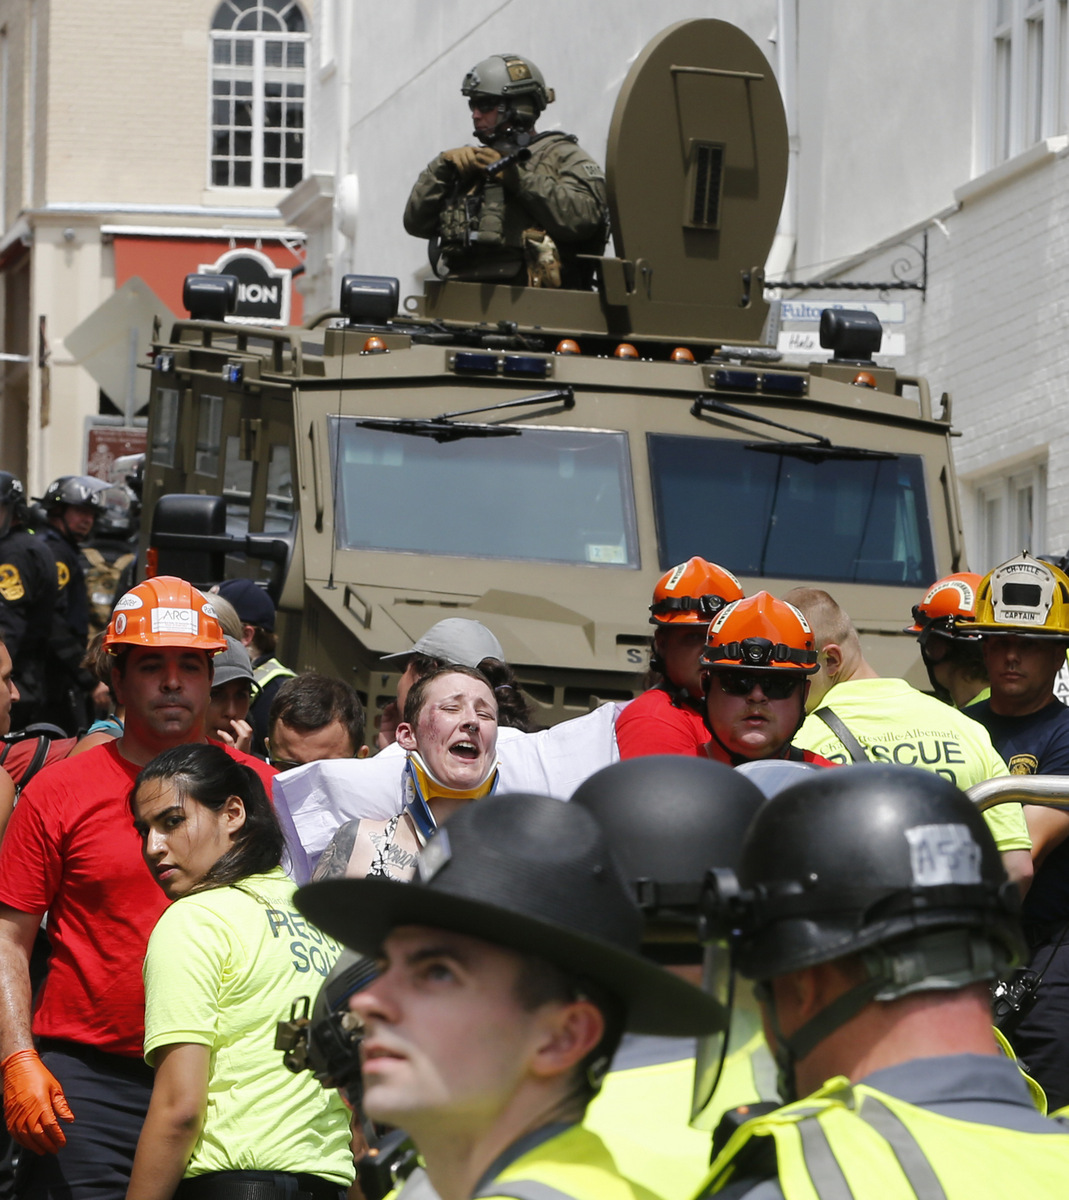 Rescue personnel help injured people while police patrol in armored vehicles after a car ran into a large group of protesters after an white nationalist rally in Charlottesville, Va., Aug. 12, 2017. (AP/Steve Helber)